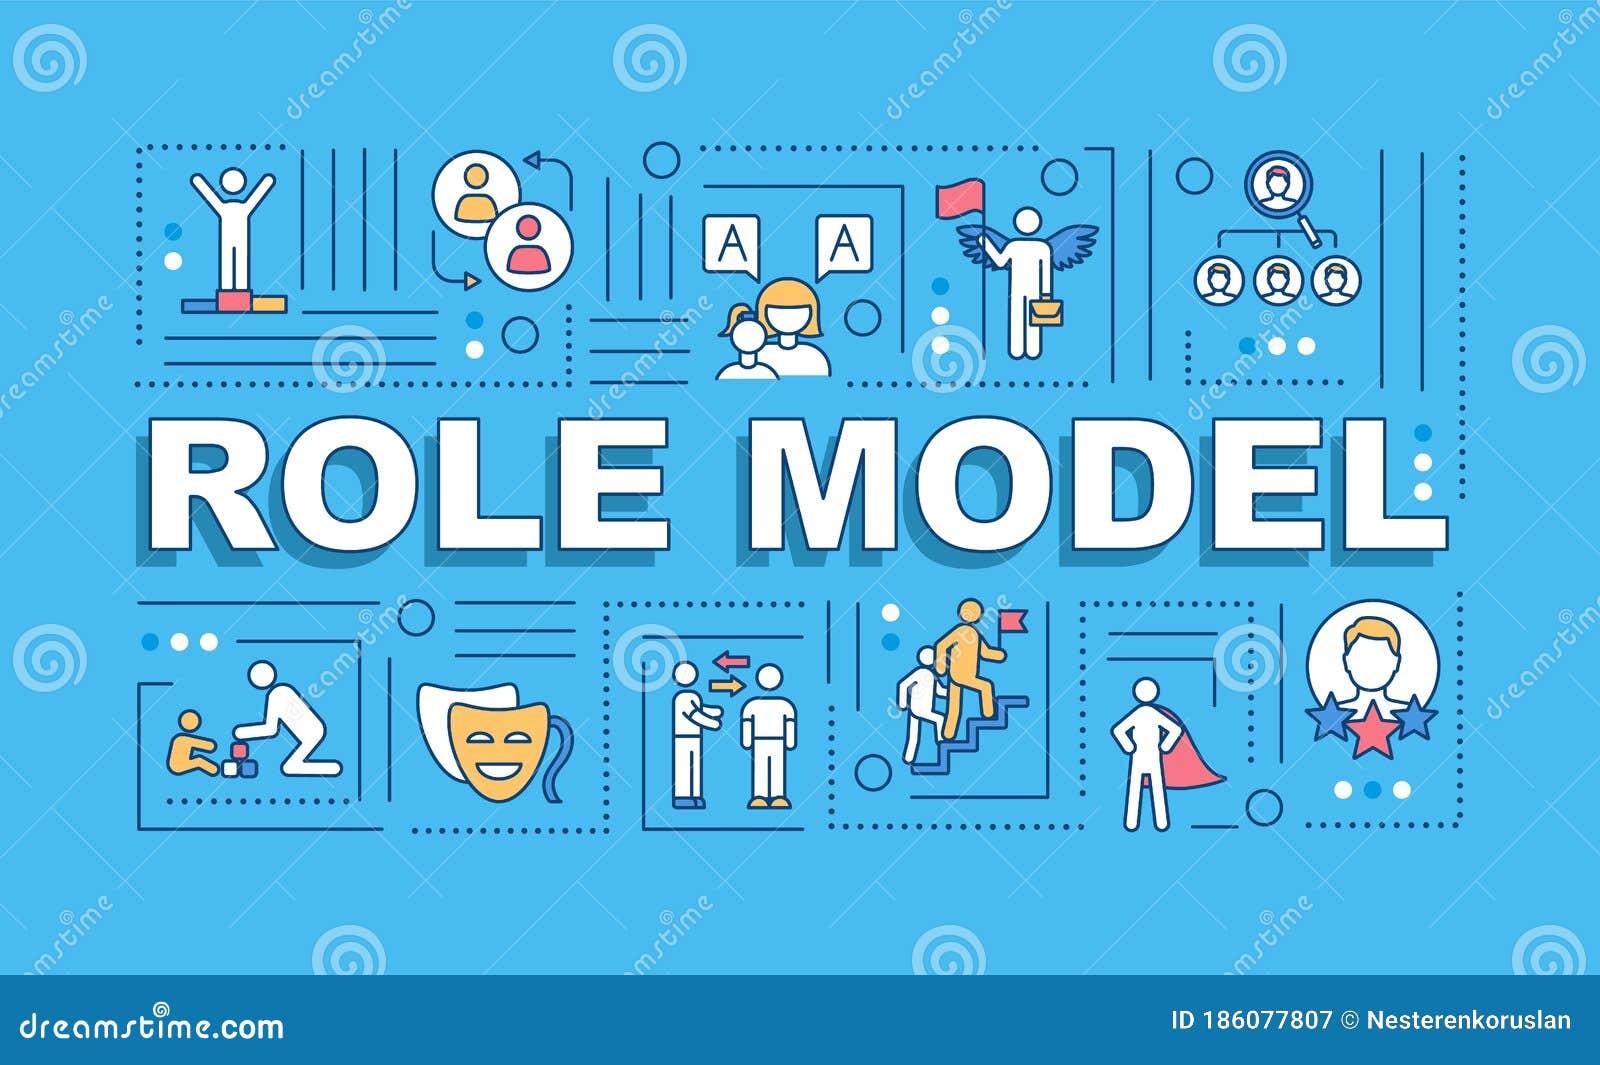 Role Model Word  Concepts Banner Stock Vector Illustration of lettering concept 186077807